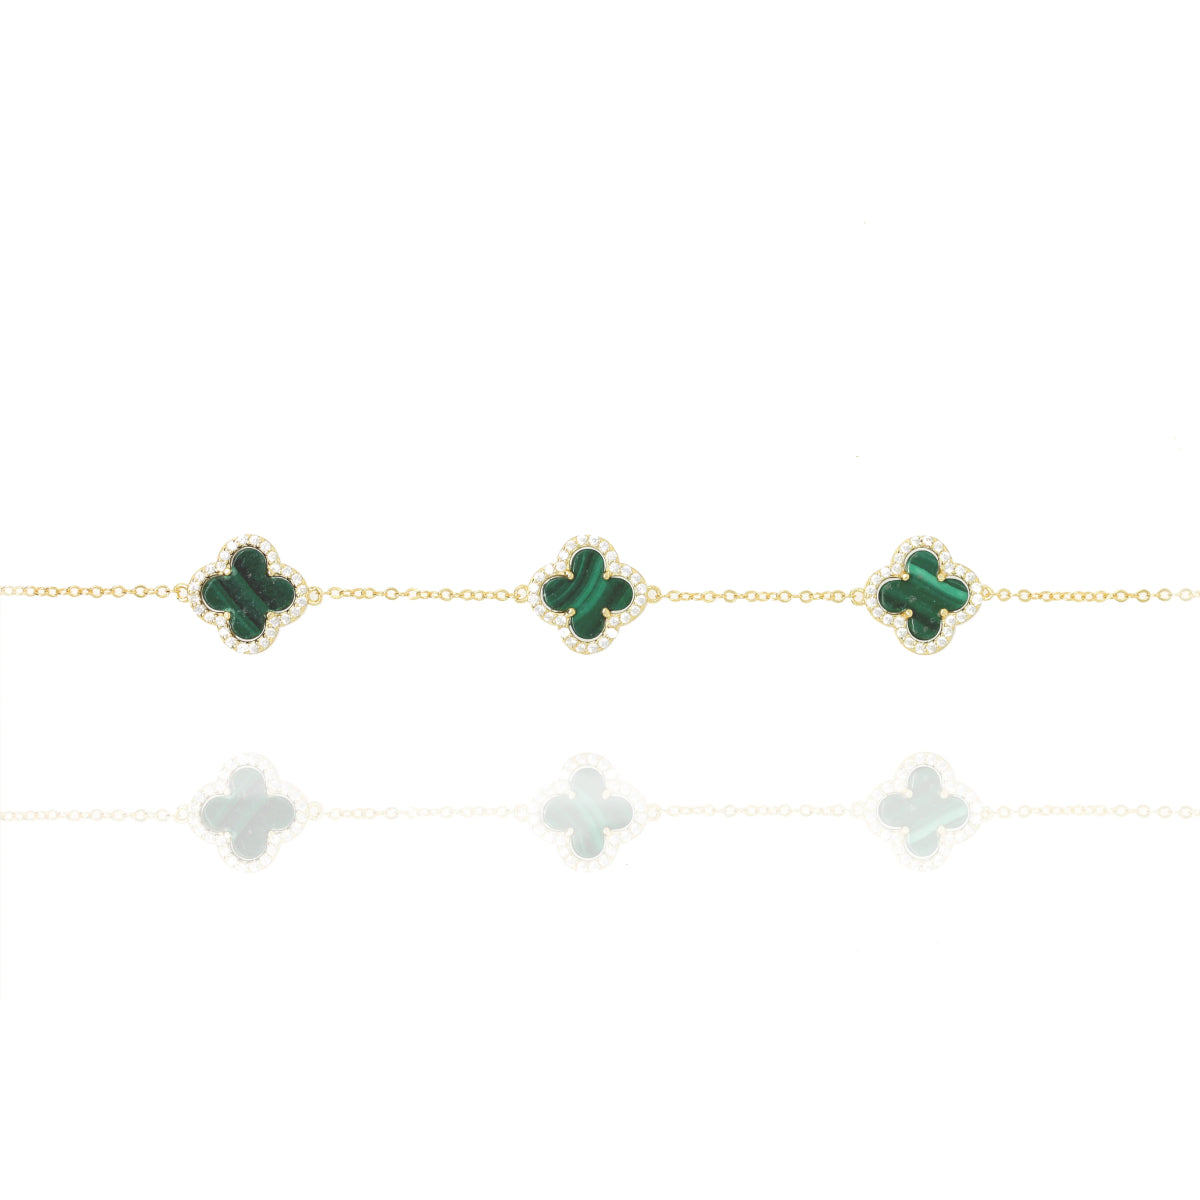 Clover Chain Bracelet with Malachite and Cubic Zirconia (Gold)